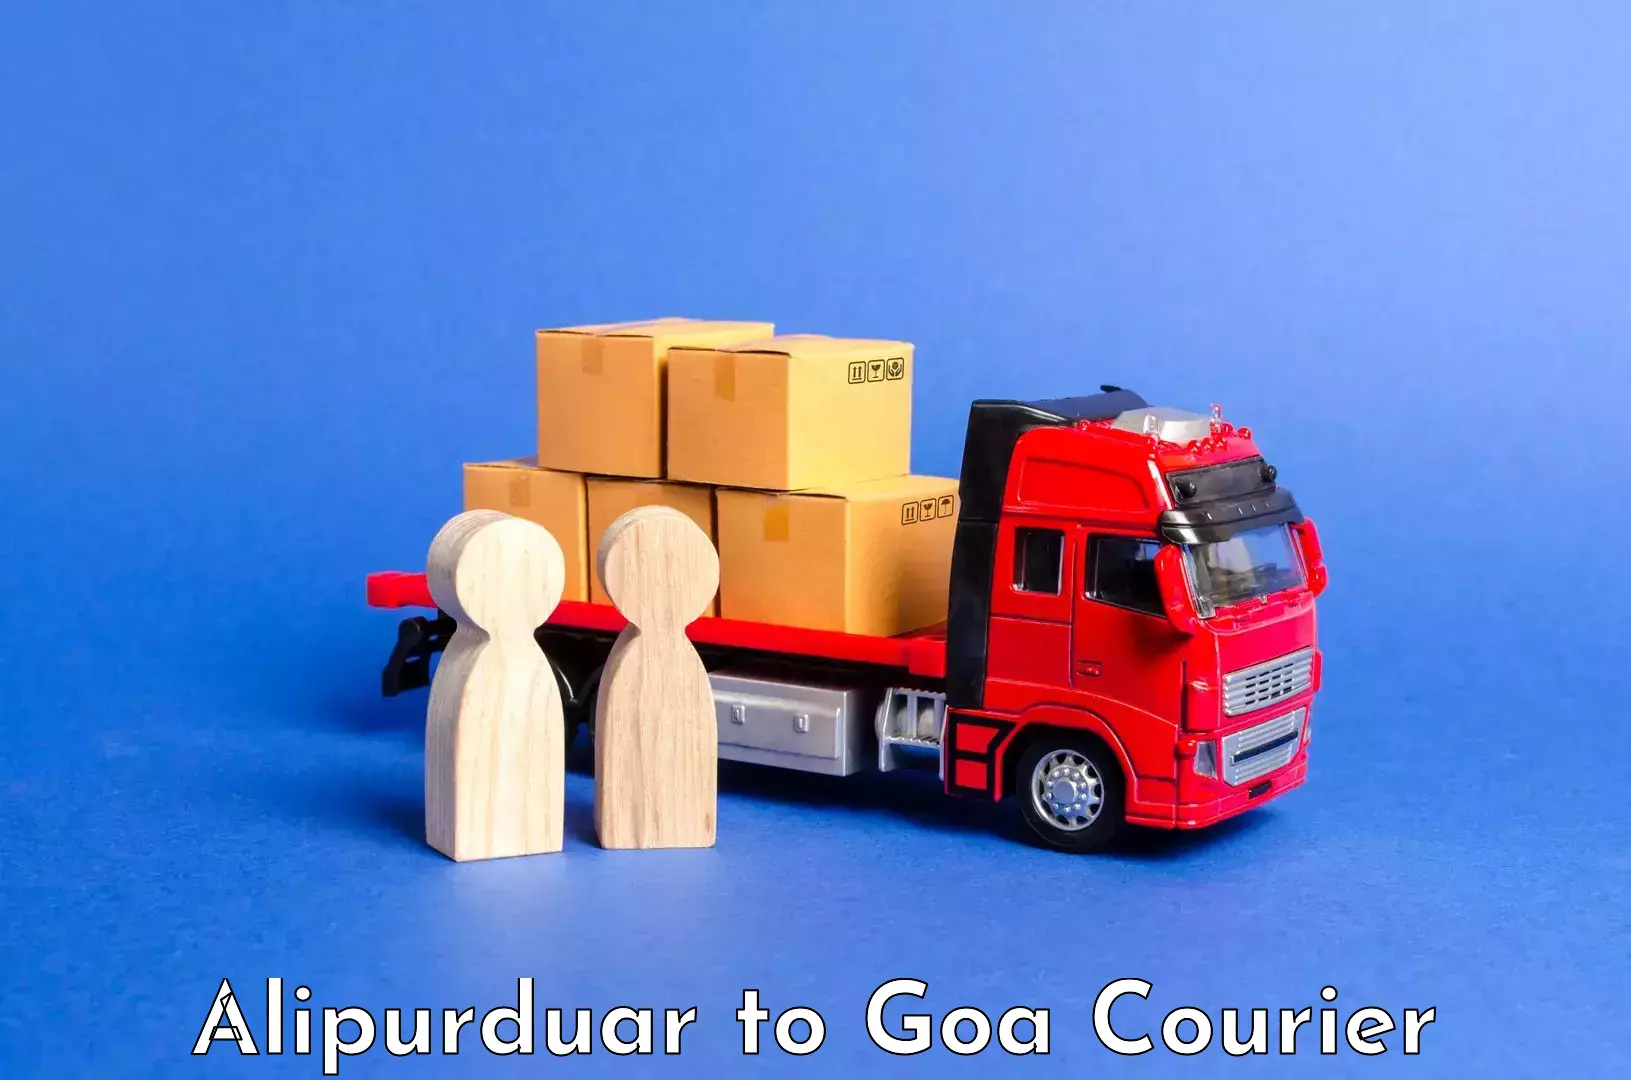 Luggage delivery network Alipurduar to Goa